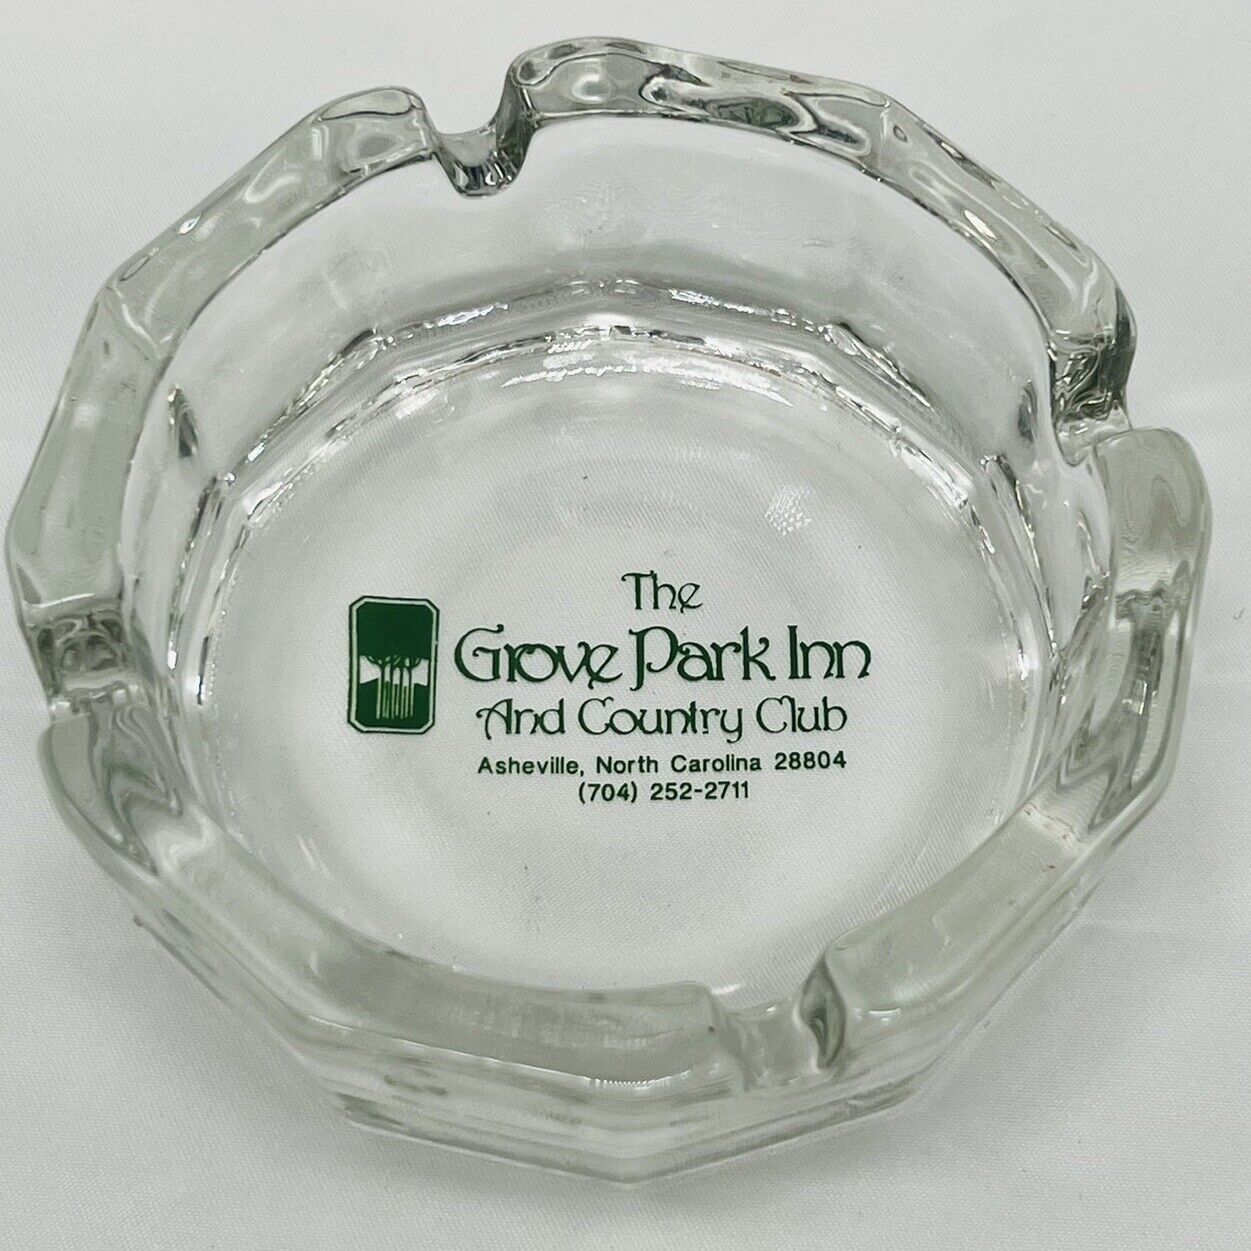 Vintage  The Grove Park Inn and Country Club Glass Ashtray Ash Tray Advertising